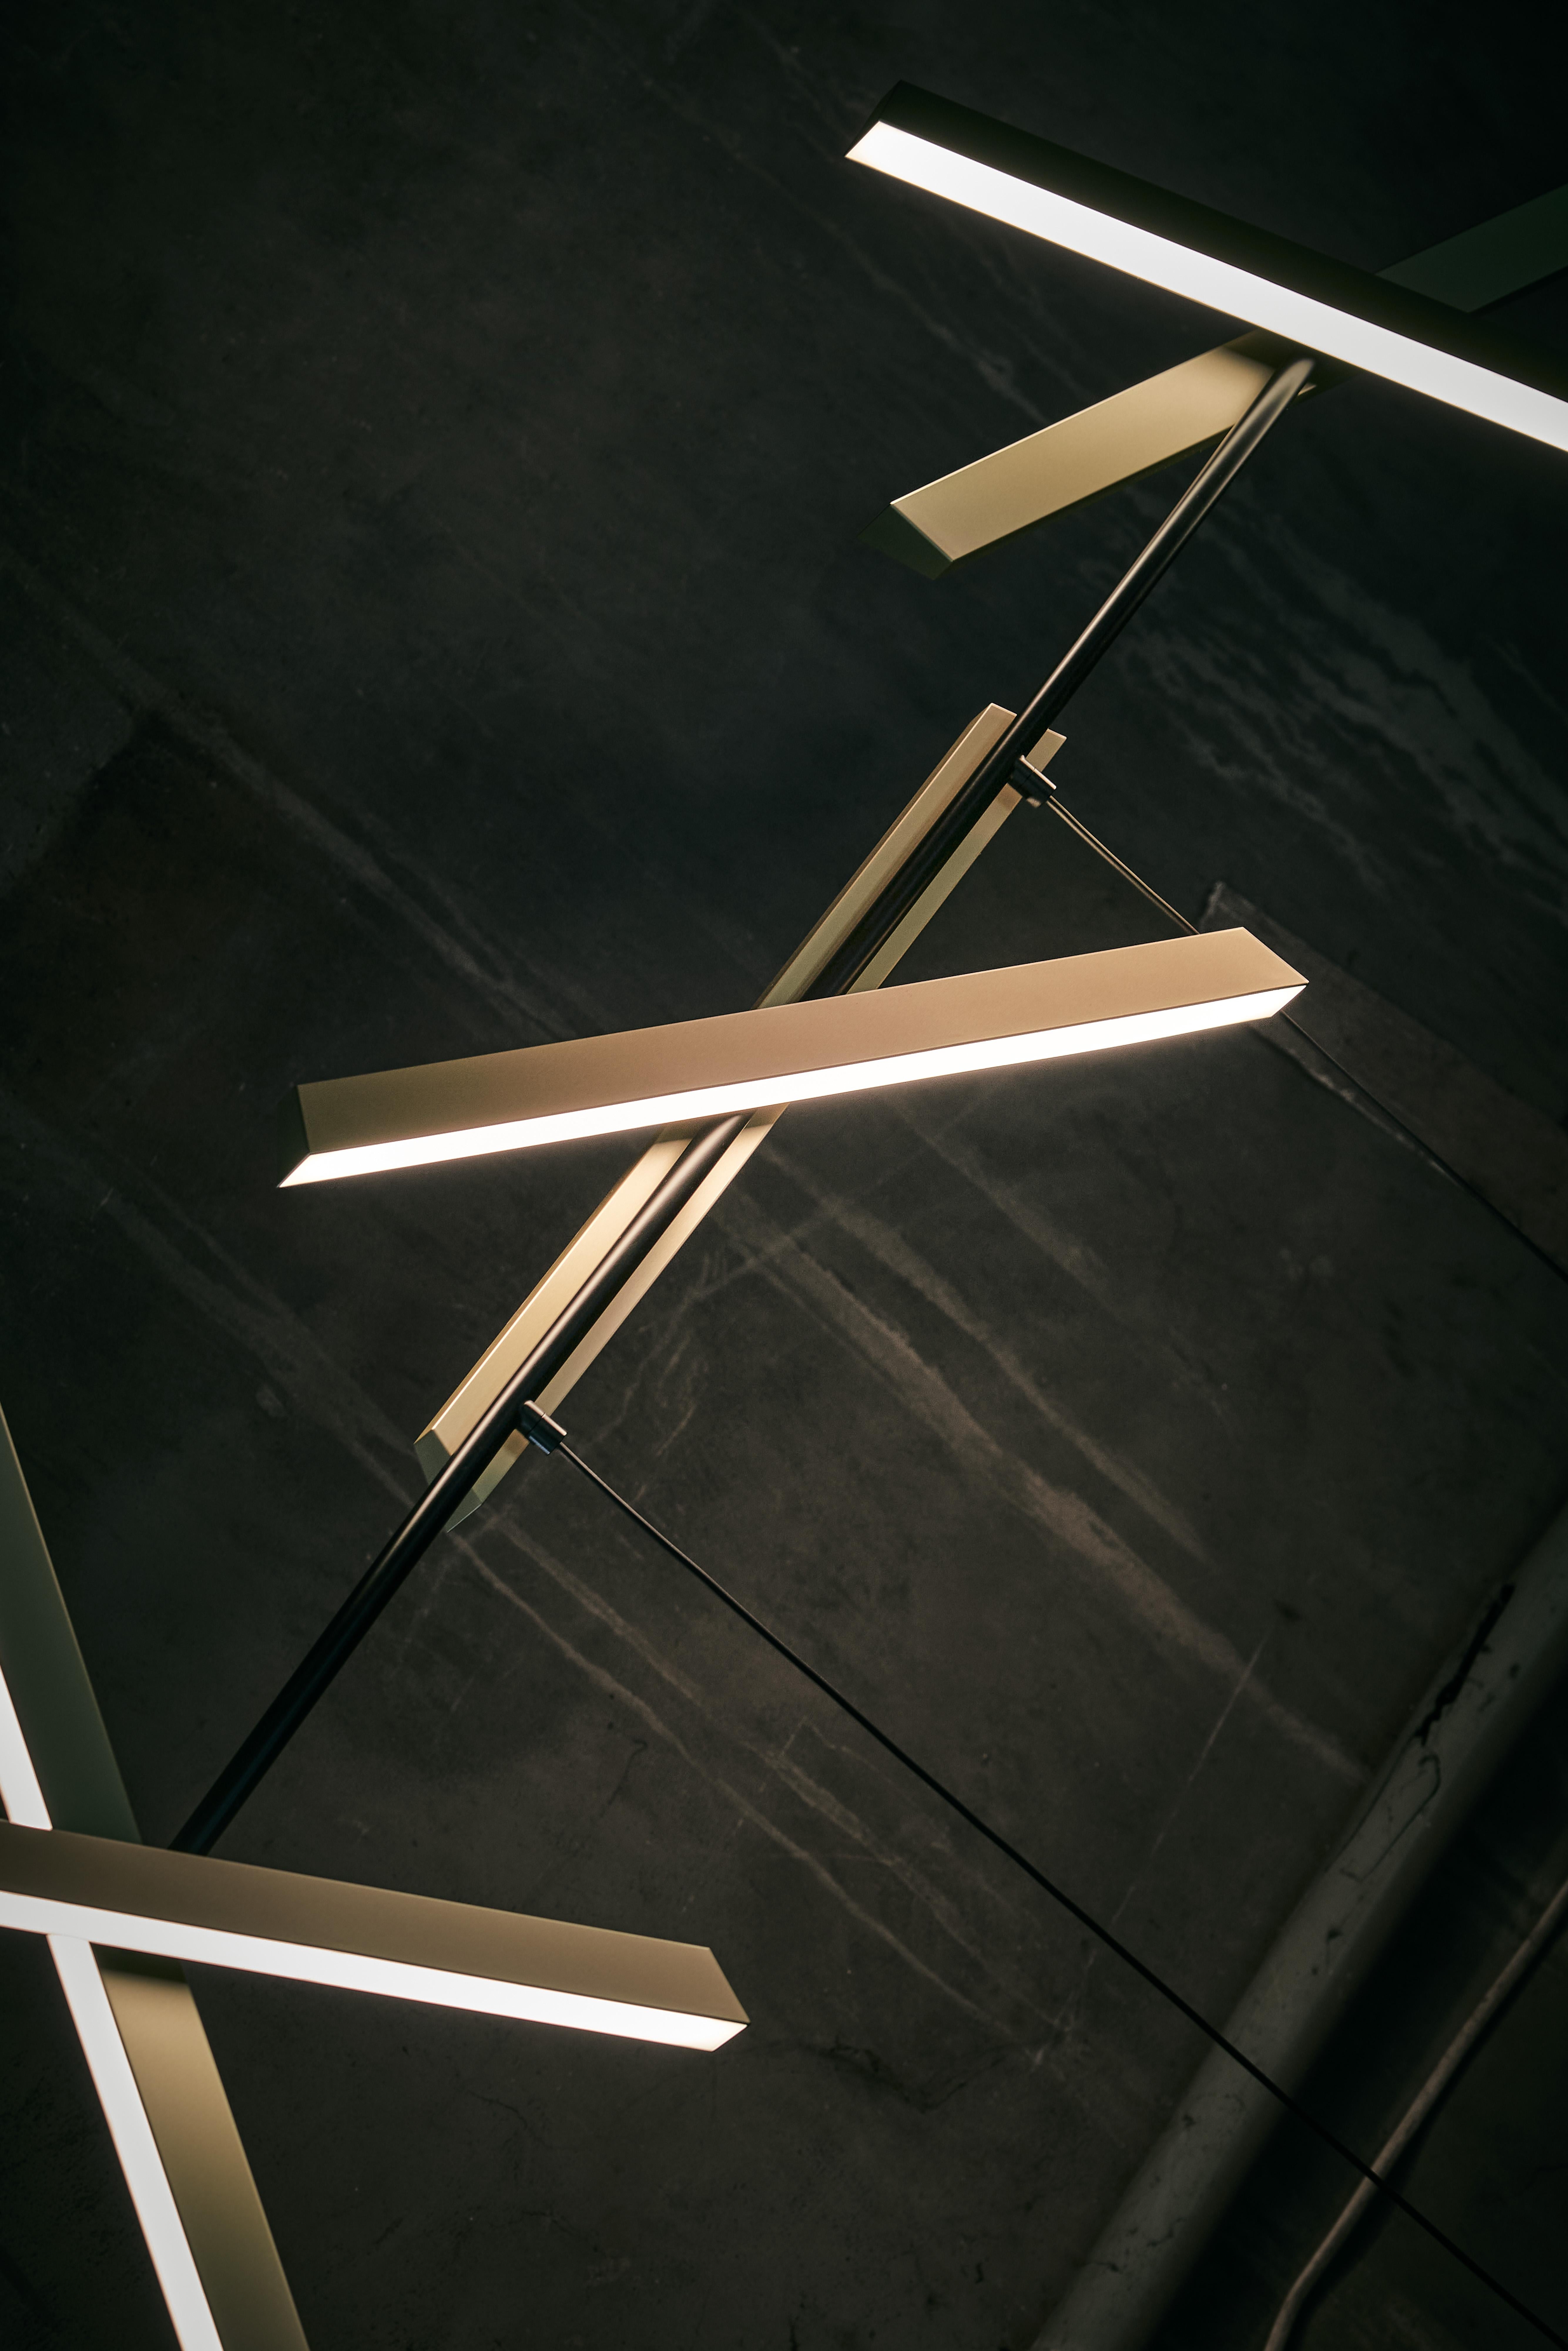 Influenced by modernist architecture, the KONNECT is beautifully crafted in quality materials. Offering both functional and versatile illumination configurations, the KONNECT Pendant PL6 delivers various adjustable angles to each of the linear